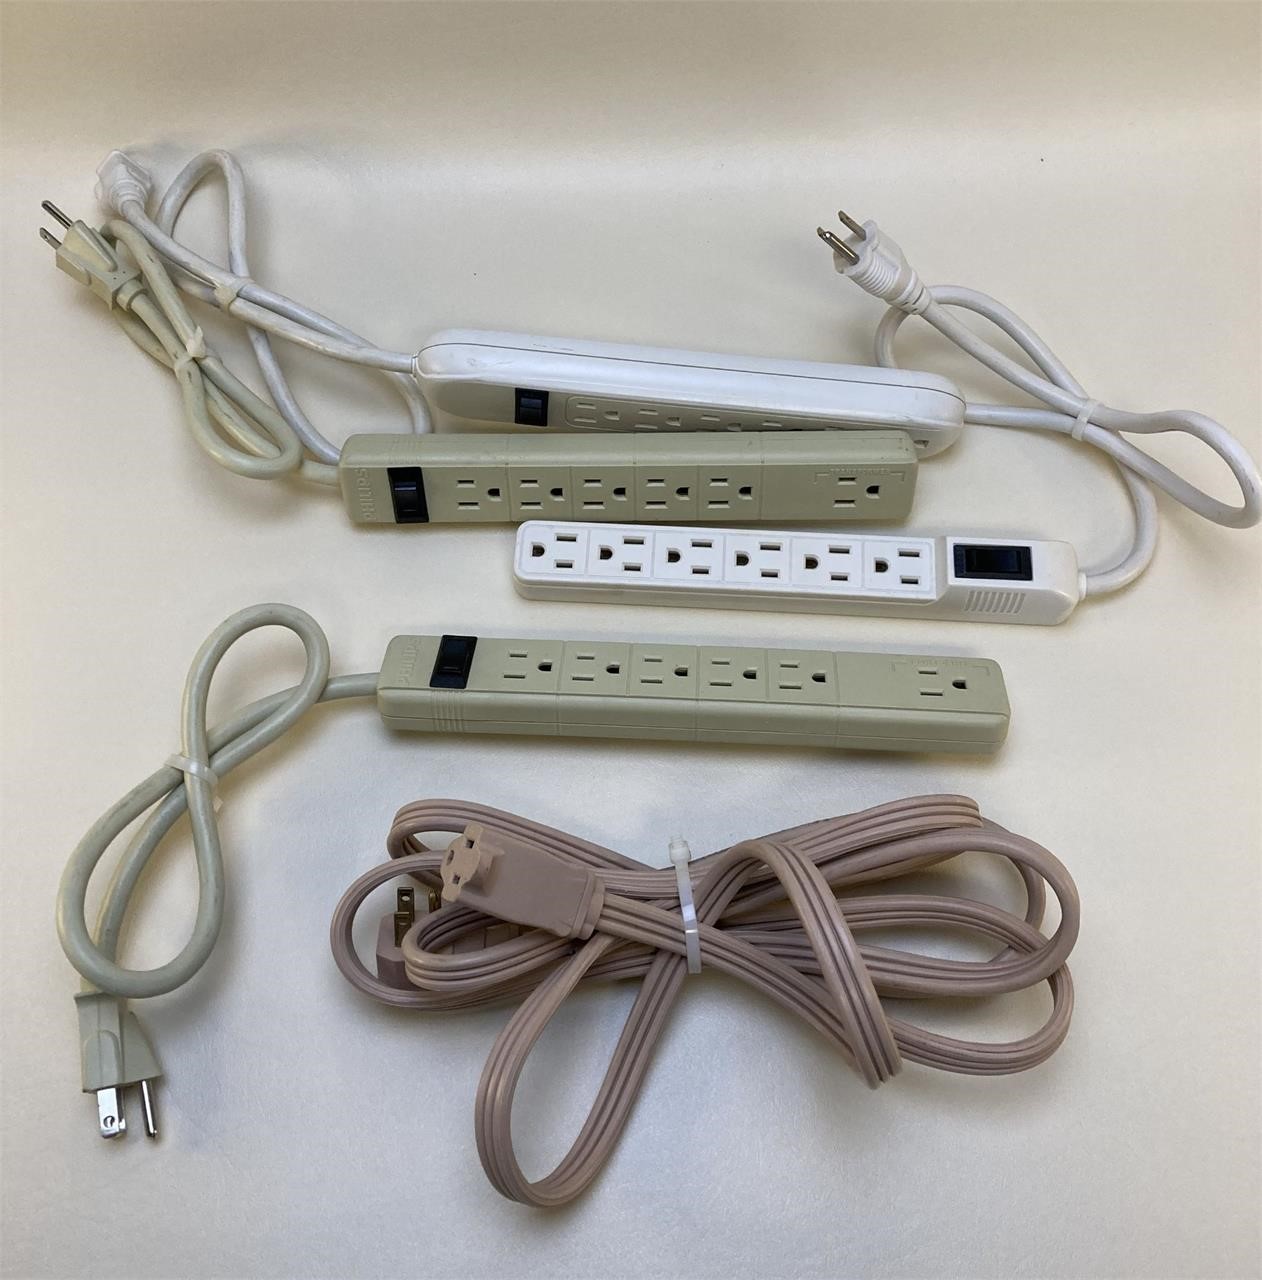 Power Strips and Extension Cord